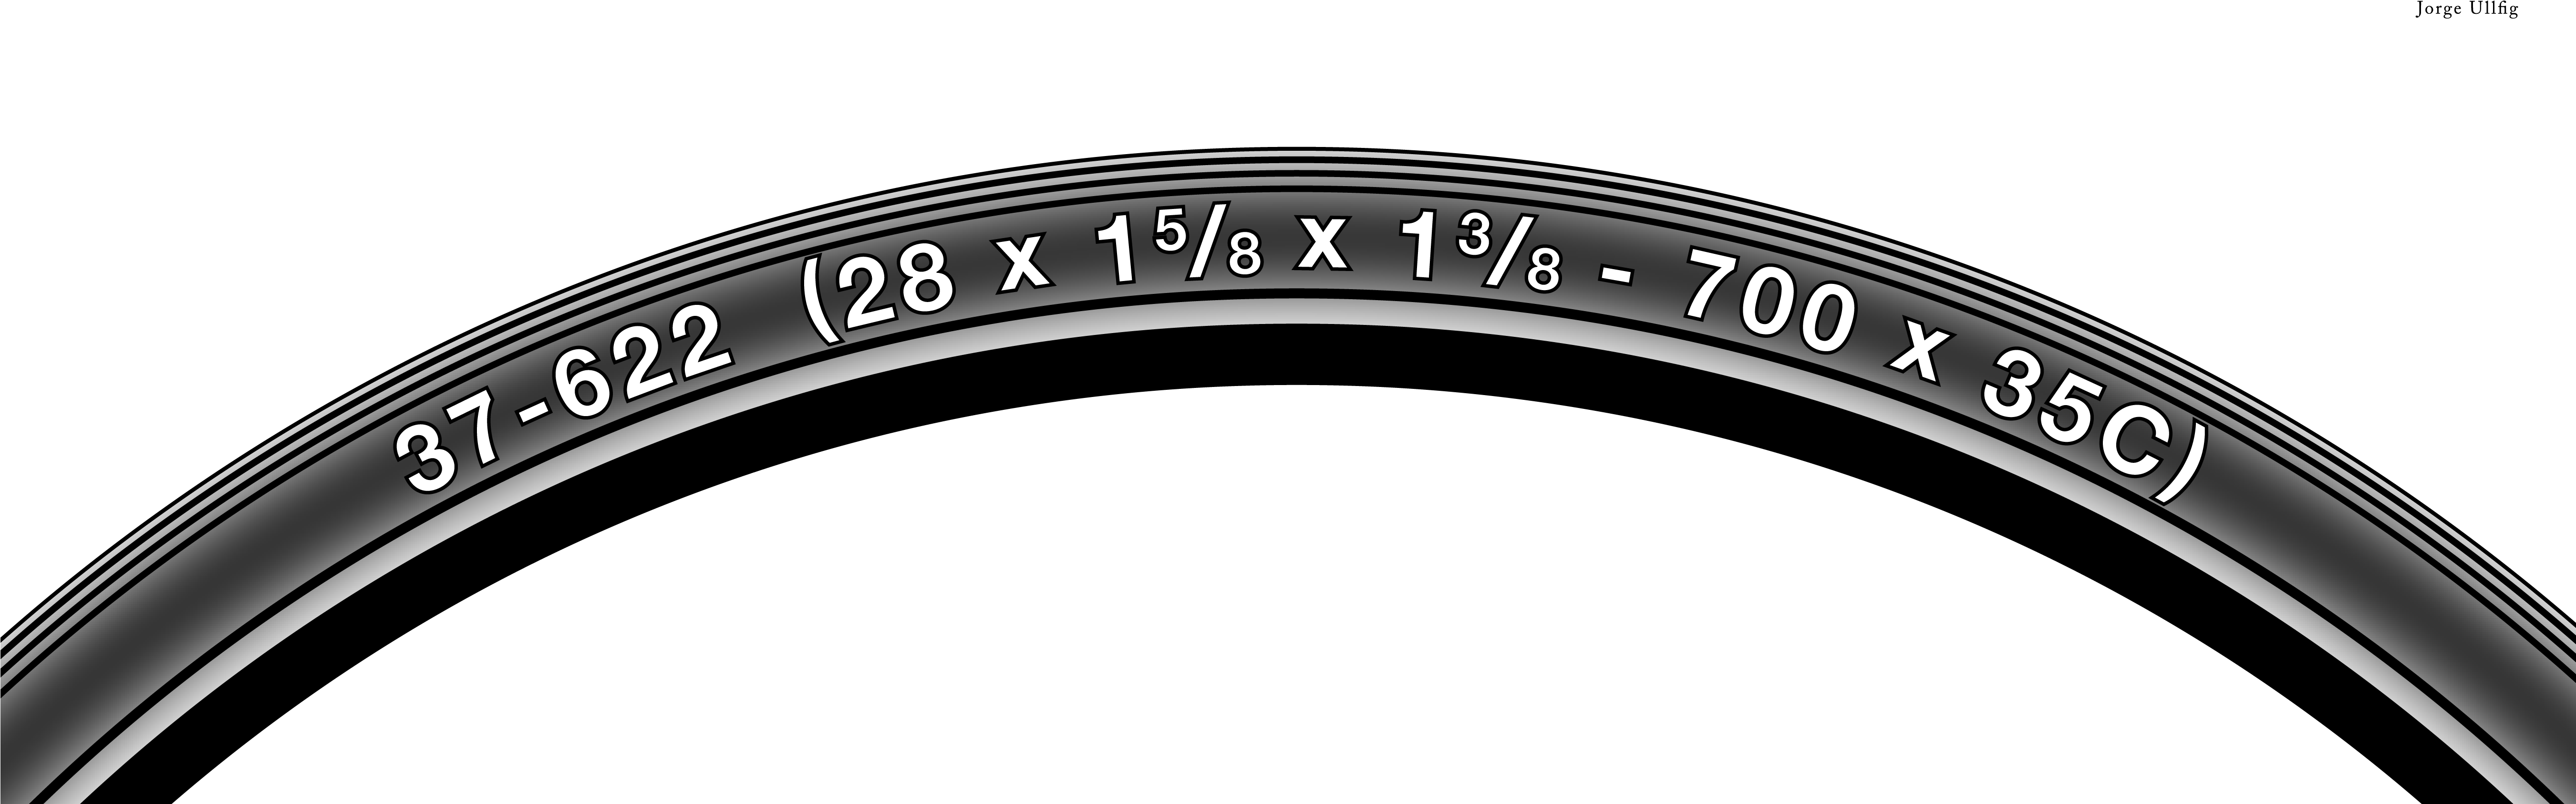 A Black And White Circular Object With White Text